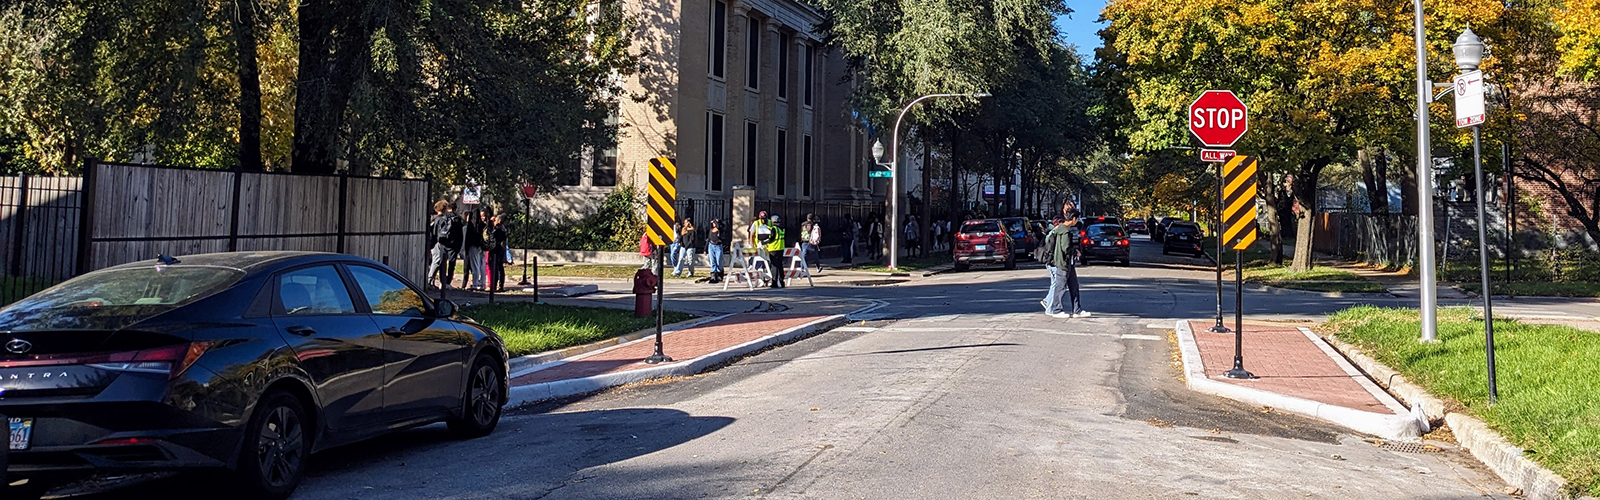 Students crossing the street in a cross with detached bumpouts narrowing the crossing distance